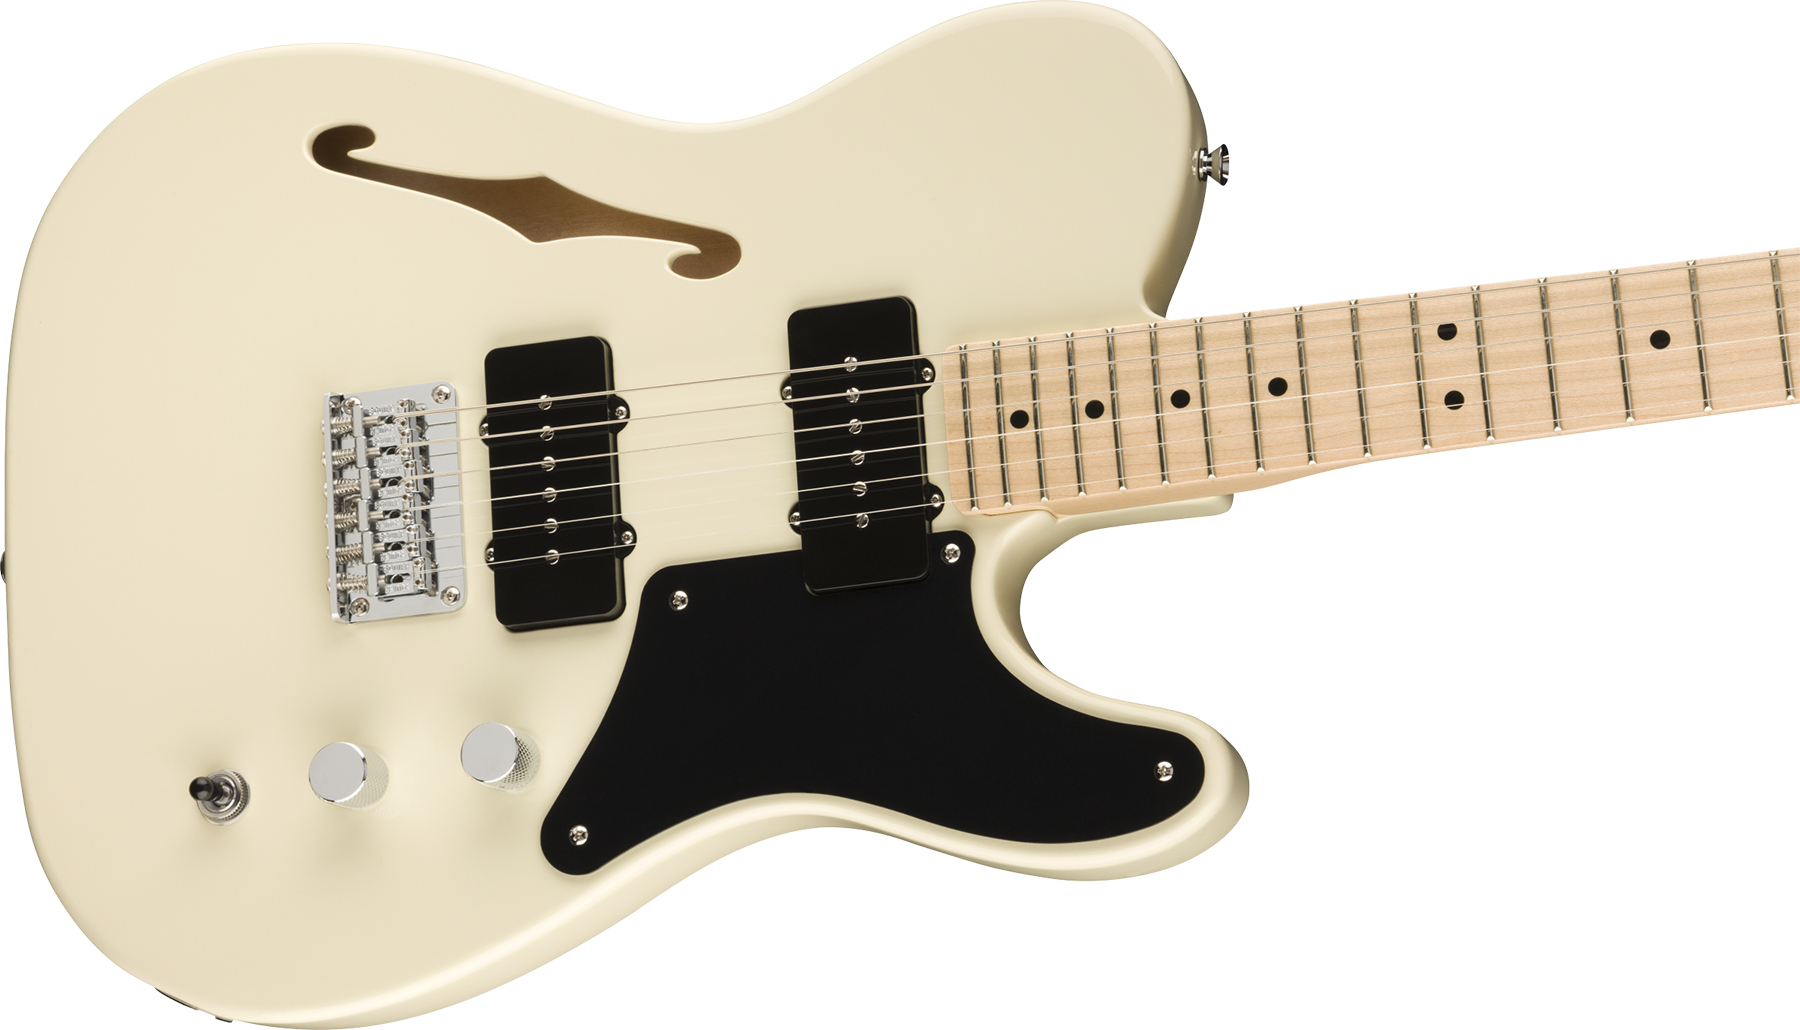 Squier Tele Thinline Cabronita Paranormal Ss Ht Mn - Olympic White - E-Gitarre in Teleform - Variation 2